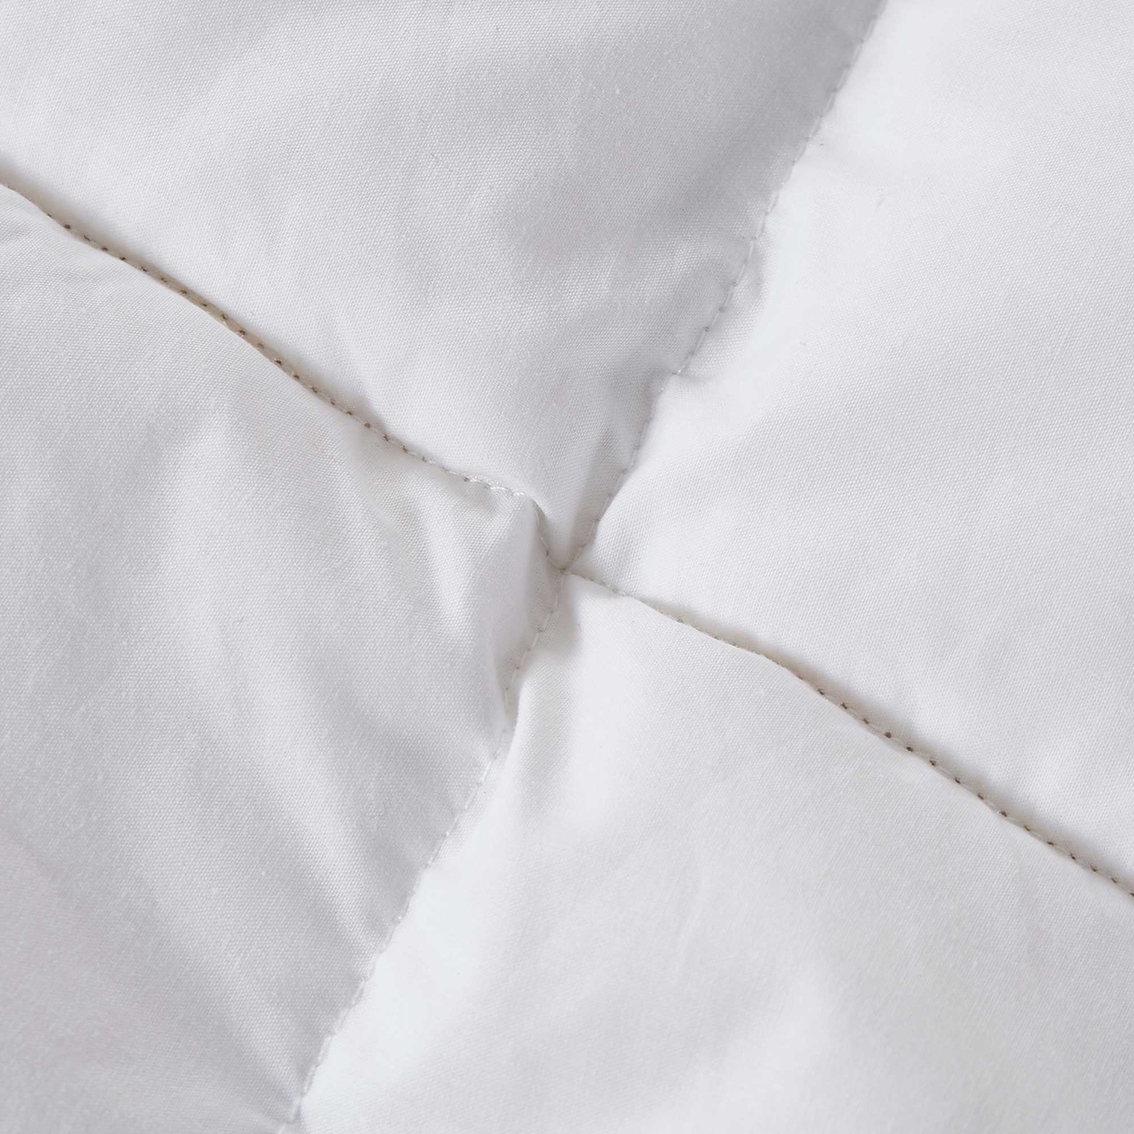 Serta 240 Thread Count 90/10 Goose Feather/Down Fiber Featherbed Mattress Topper - Image 6 of 7